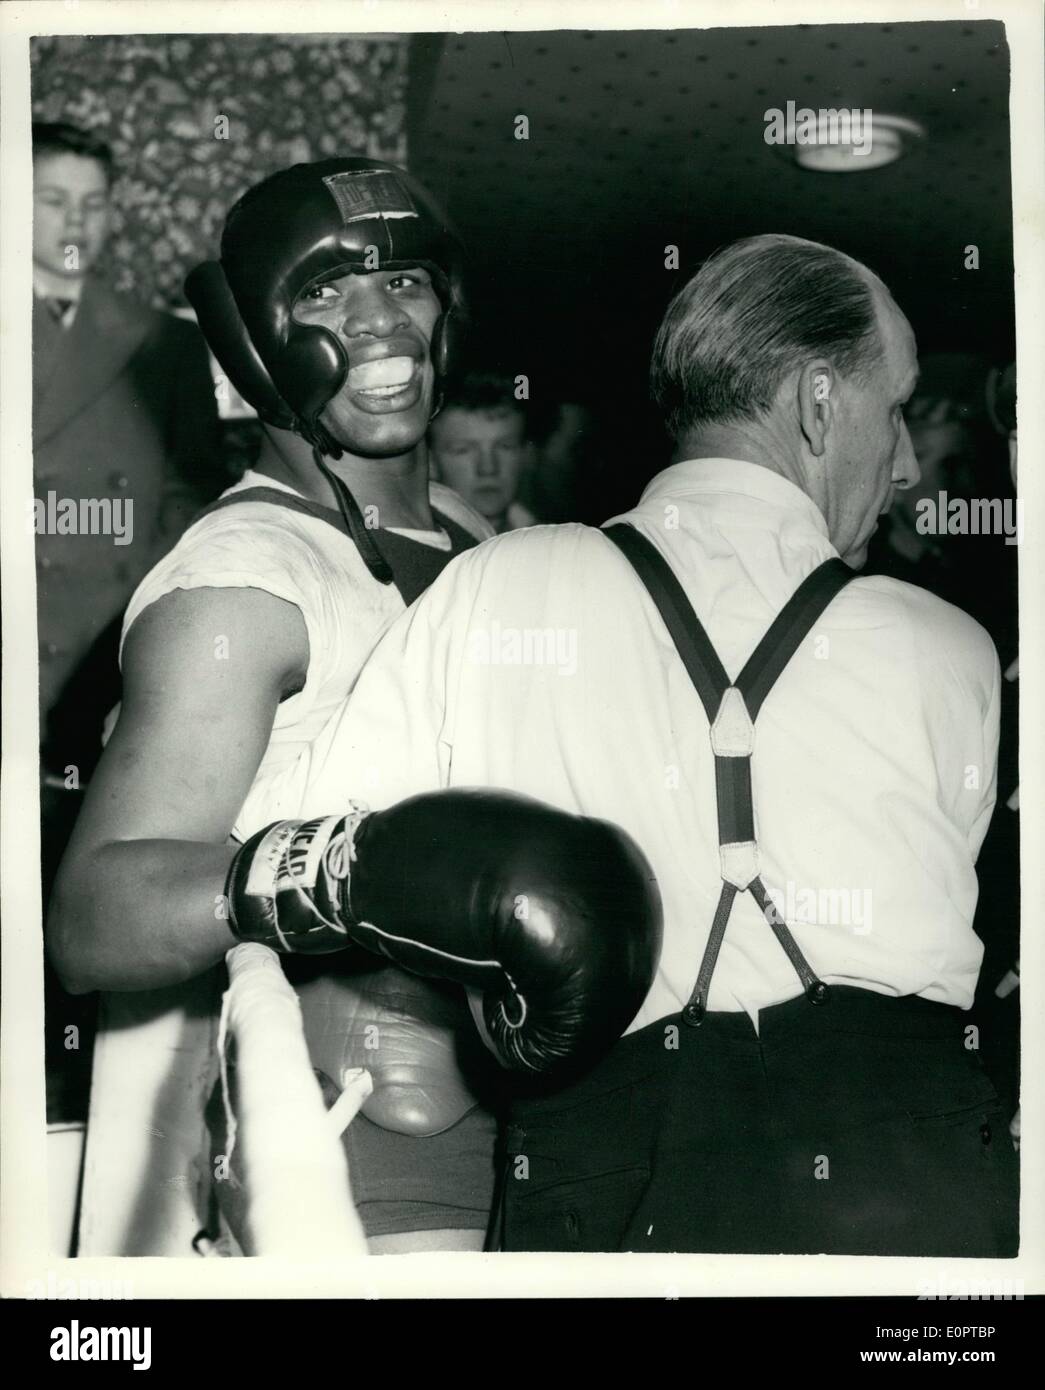 Feb. 02, 1957 - Valdes and Lave sparring but is stopped by trainers after both boxers Refused to stop Boxing: Nino Valdes the Cuban heavyweight who is to fight Joe Erskine at Harringay on 19th. Feb. had a training session at Toby's Gymnasium this afternoon with Kitione Lave the Tonga ''Tiger''. After the bell had signalled end of the first round both boxers refused to stop fighting - and had to be parted by the seconds and trainers. Photo shows Dave Edgar - the agent - keeps a tighted hold on Nino Valdes - until Kitione Lave had left the ring - after the incident this afternoon. Stock Photo